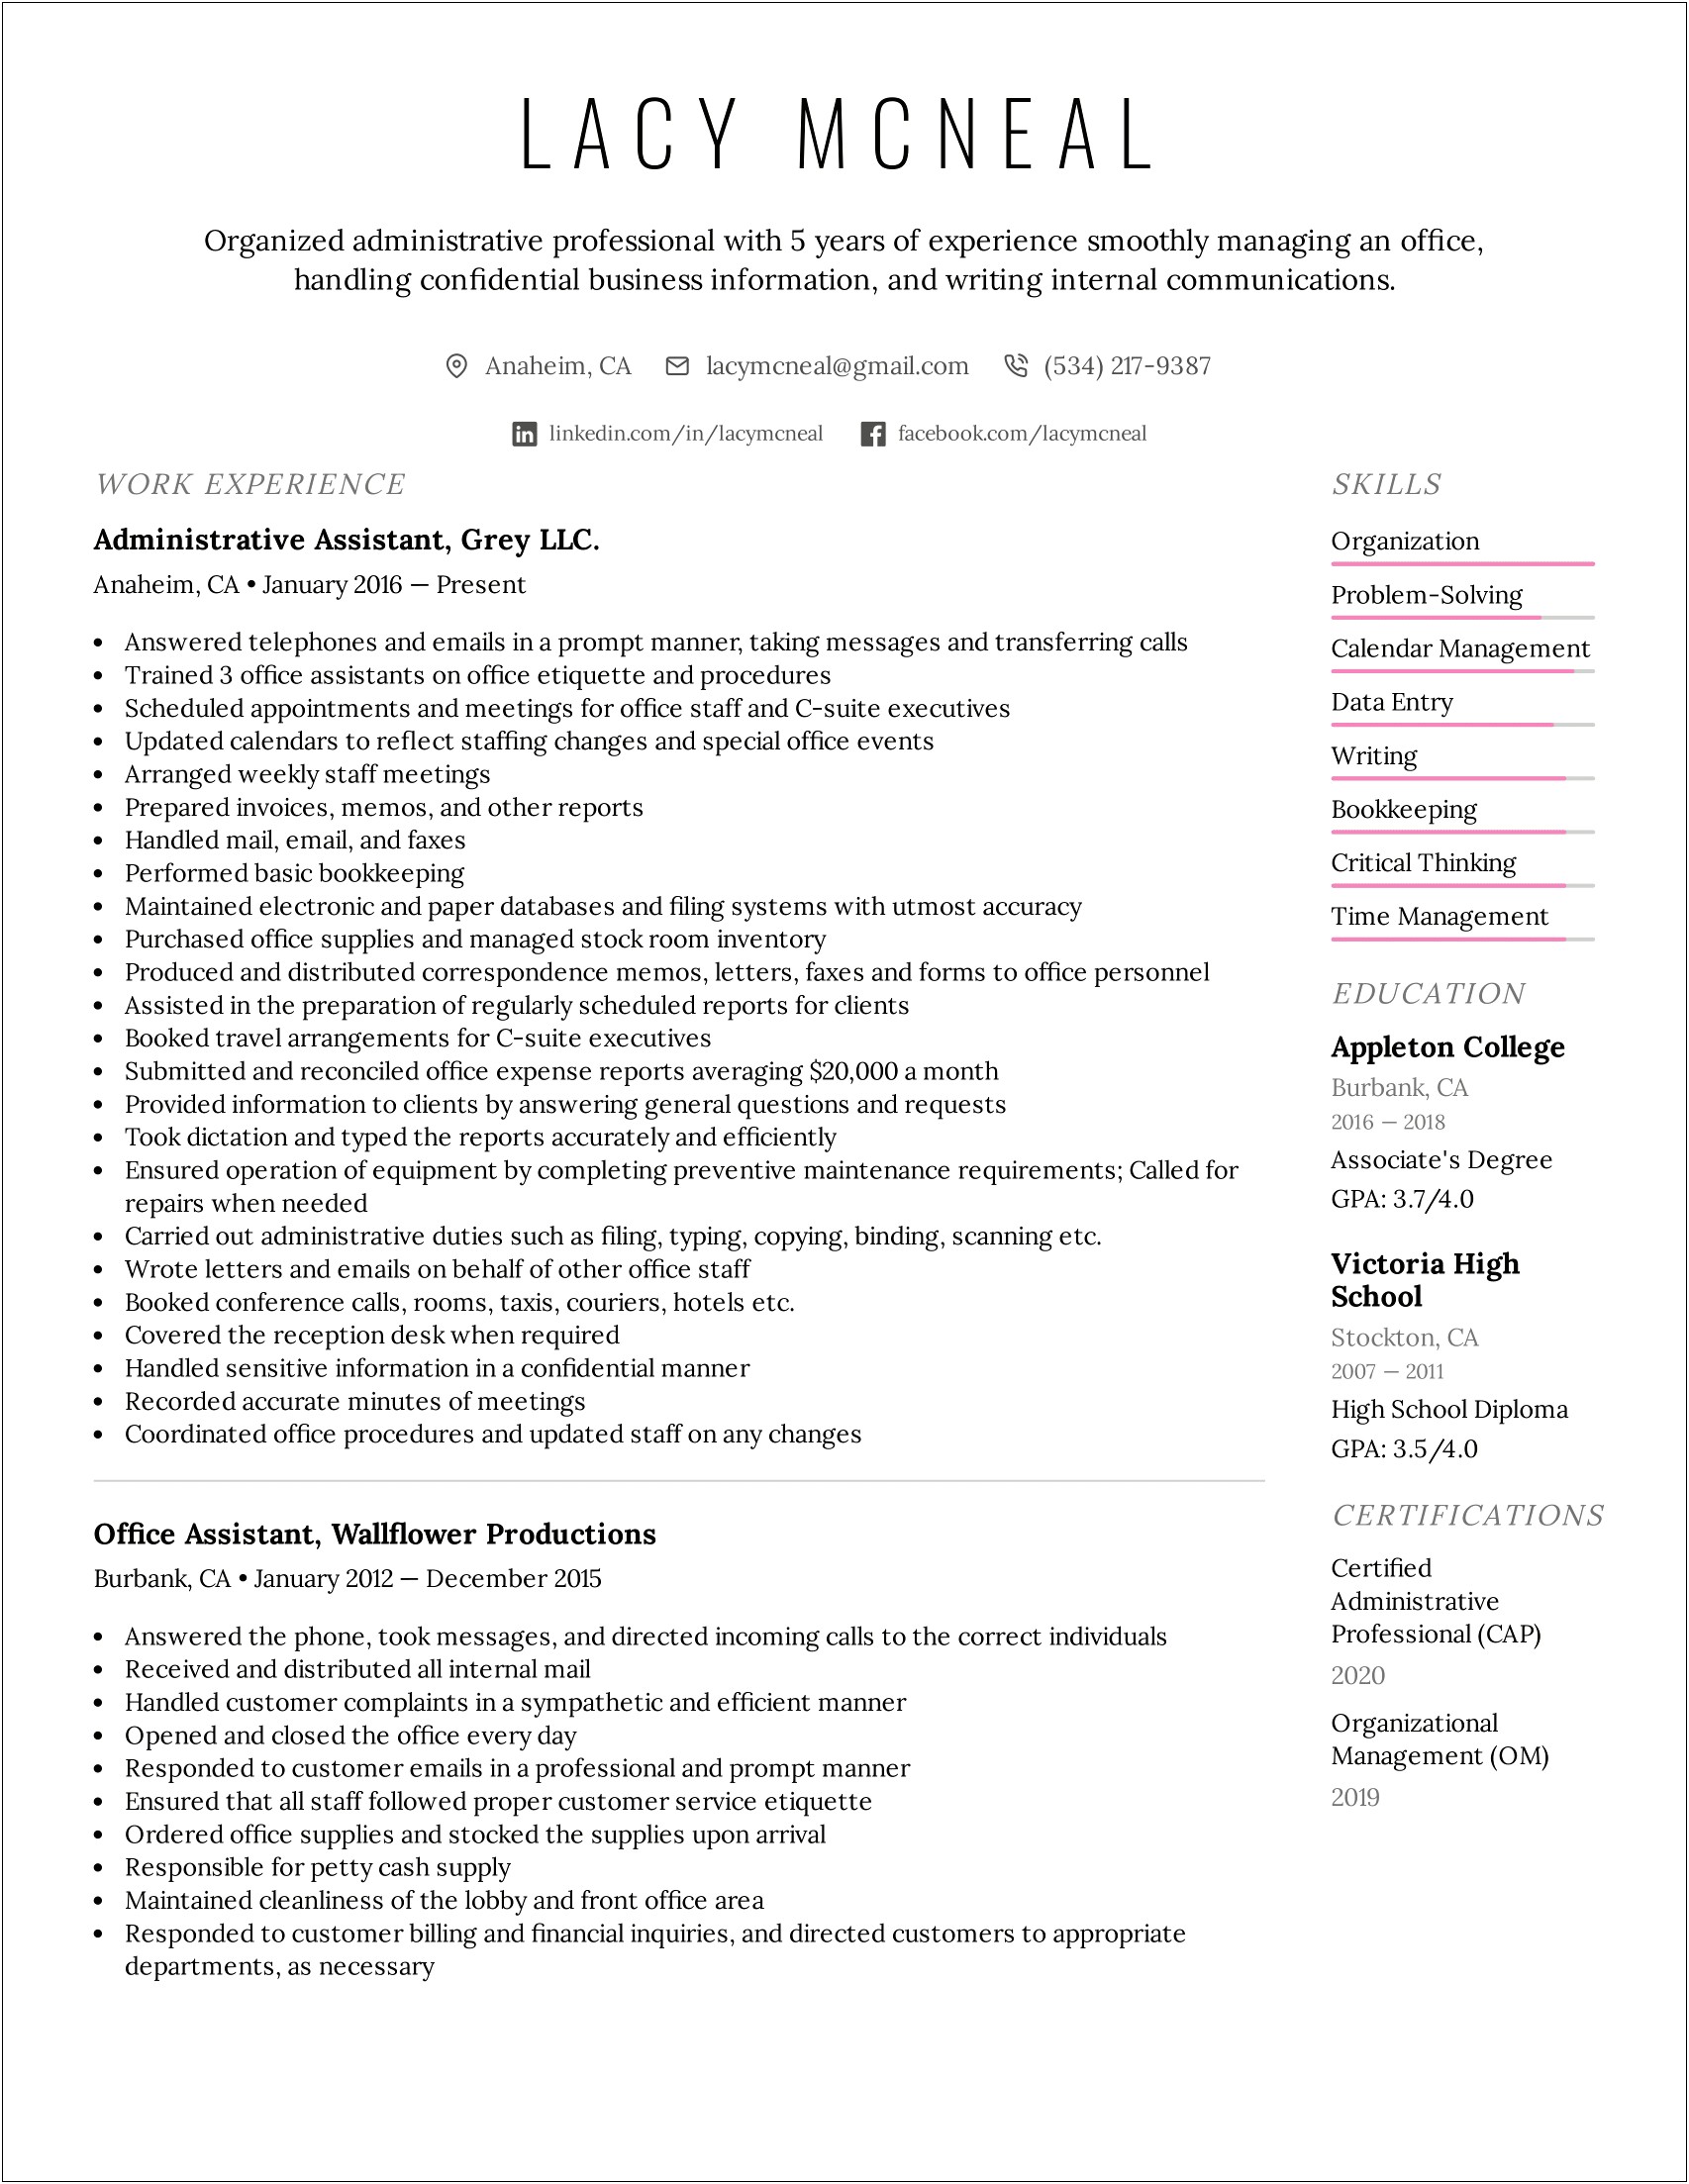 Resume Job Duties For Office Assistant